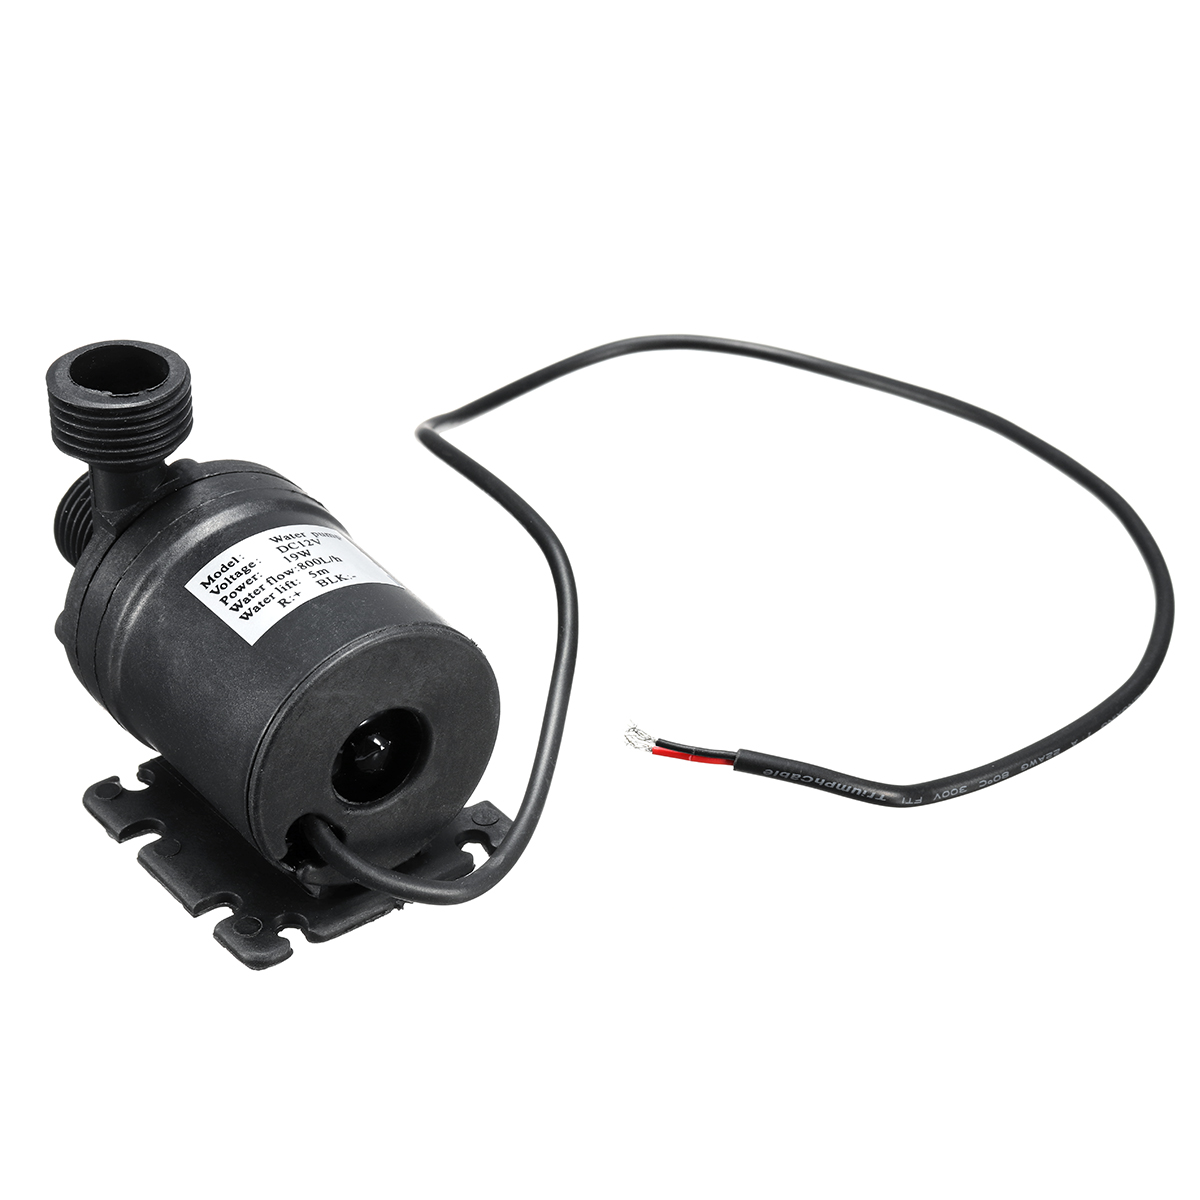 ZYW680-Mini-DC-24V-Water-Pump-Ultra-Quiet-55m-Lift-Brushless-Motor-Submersible-Water-Pump-1531436-7